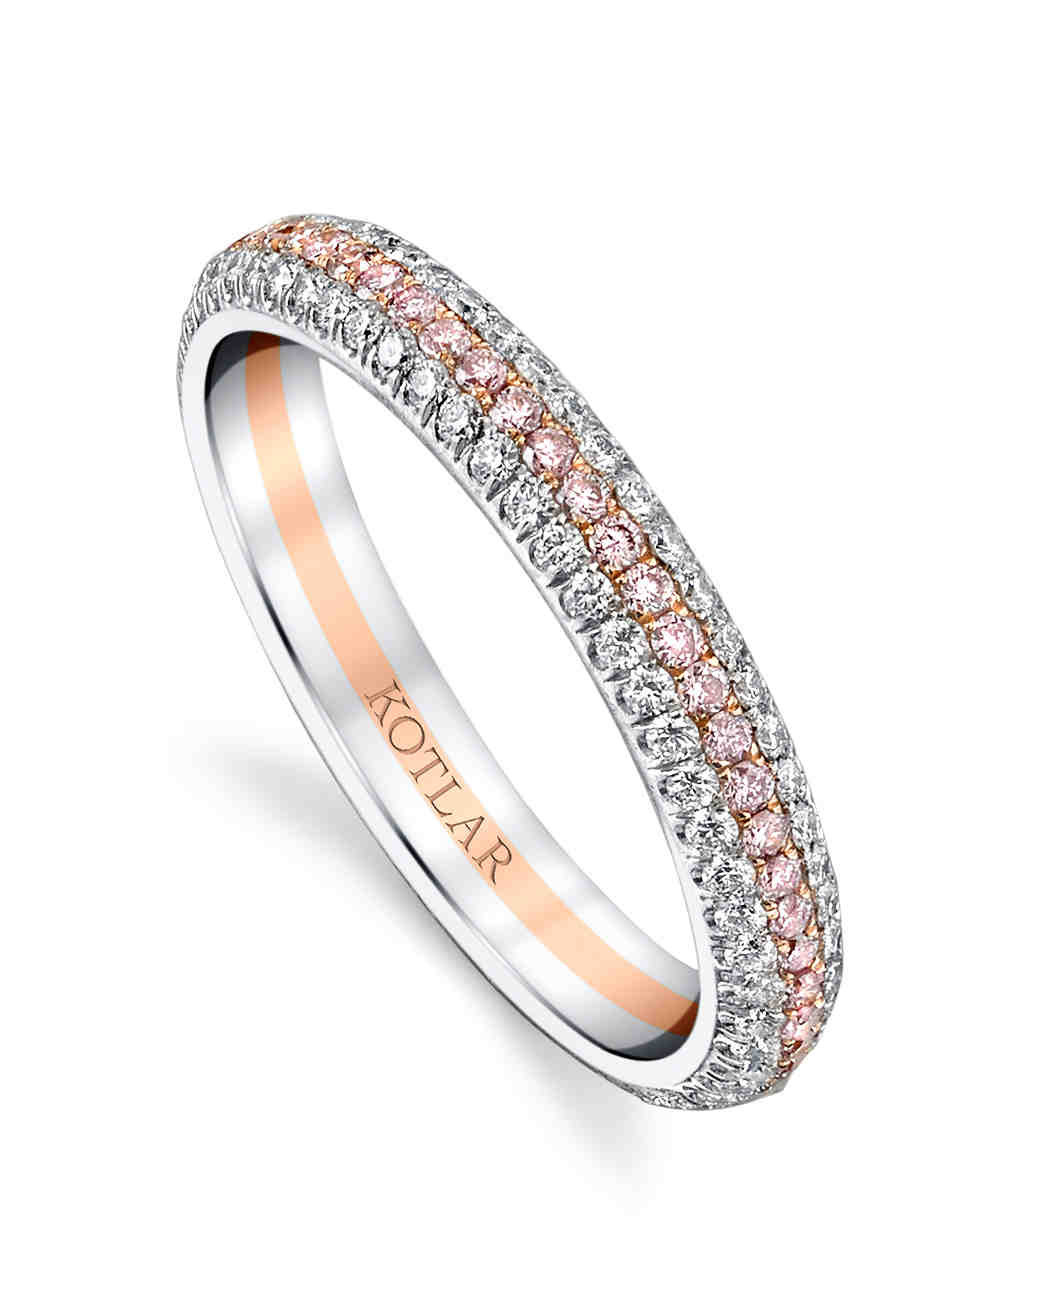 Colored Diamond Wedding Rings
 70 Colored Engagement Rings We Love